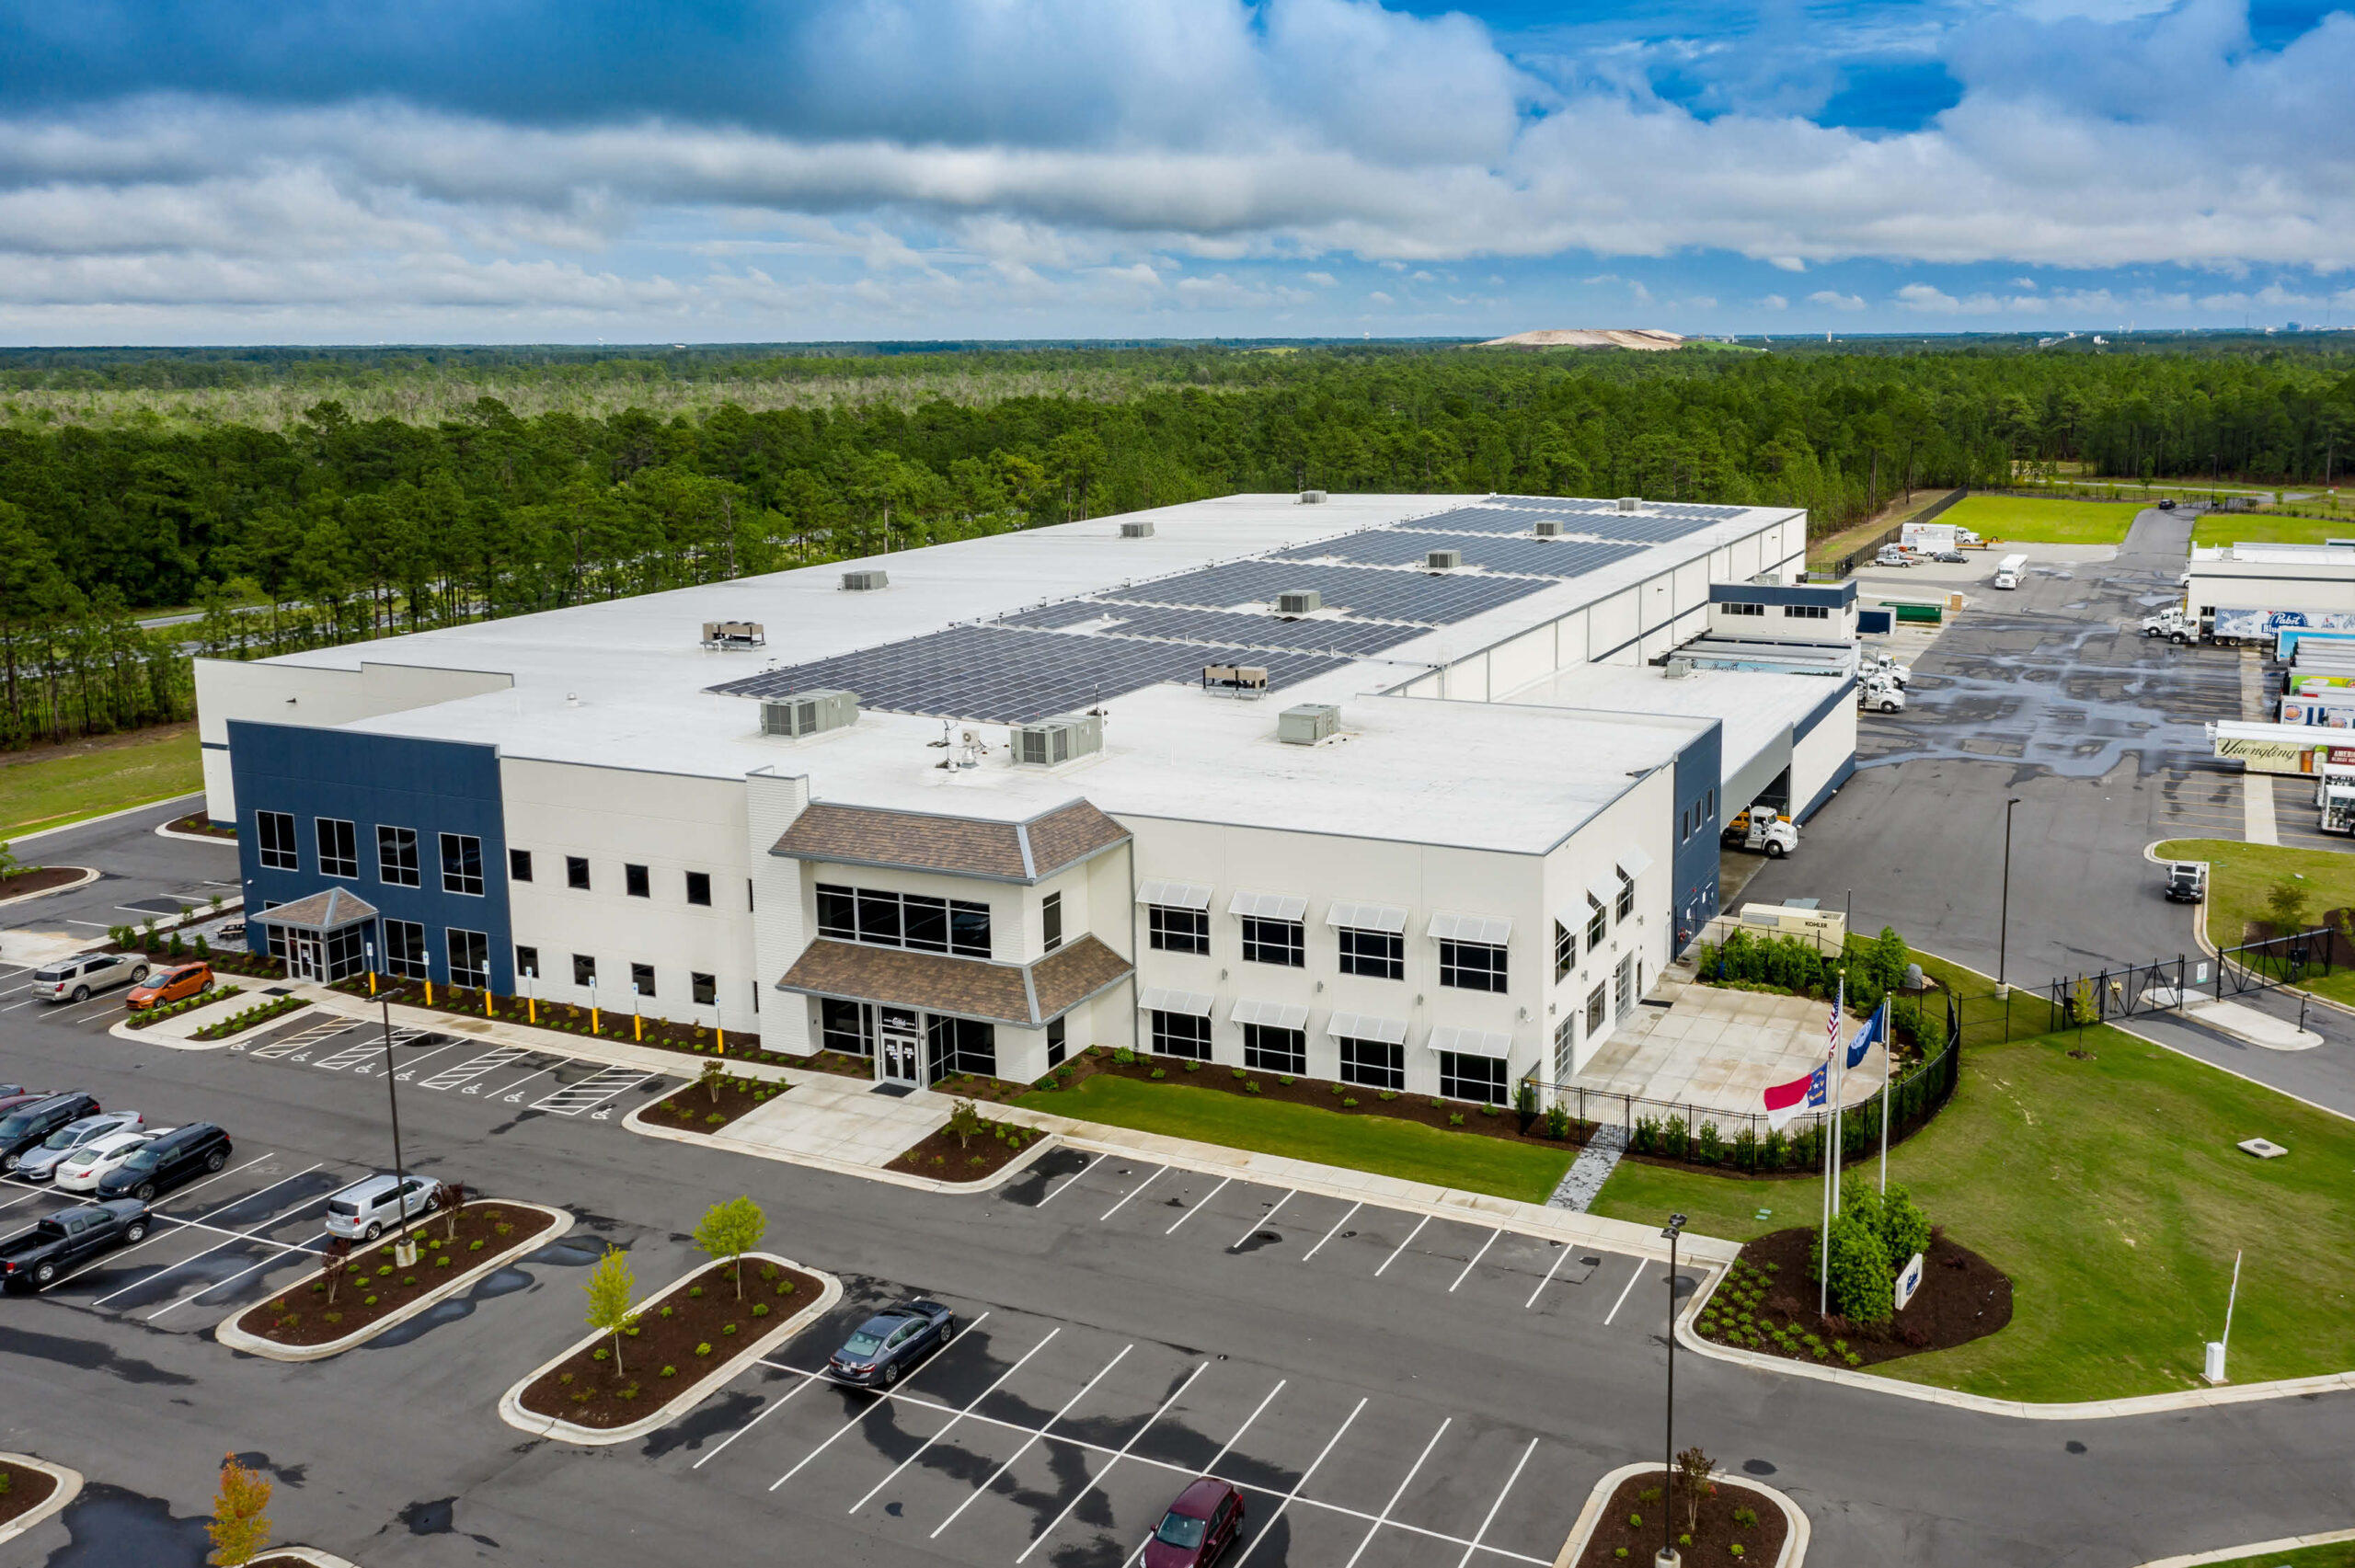 ARCO Completes Facility for Raving Fan, Coastal Beverage Company